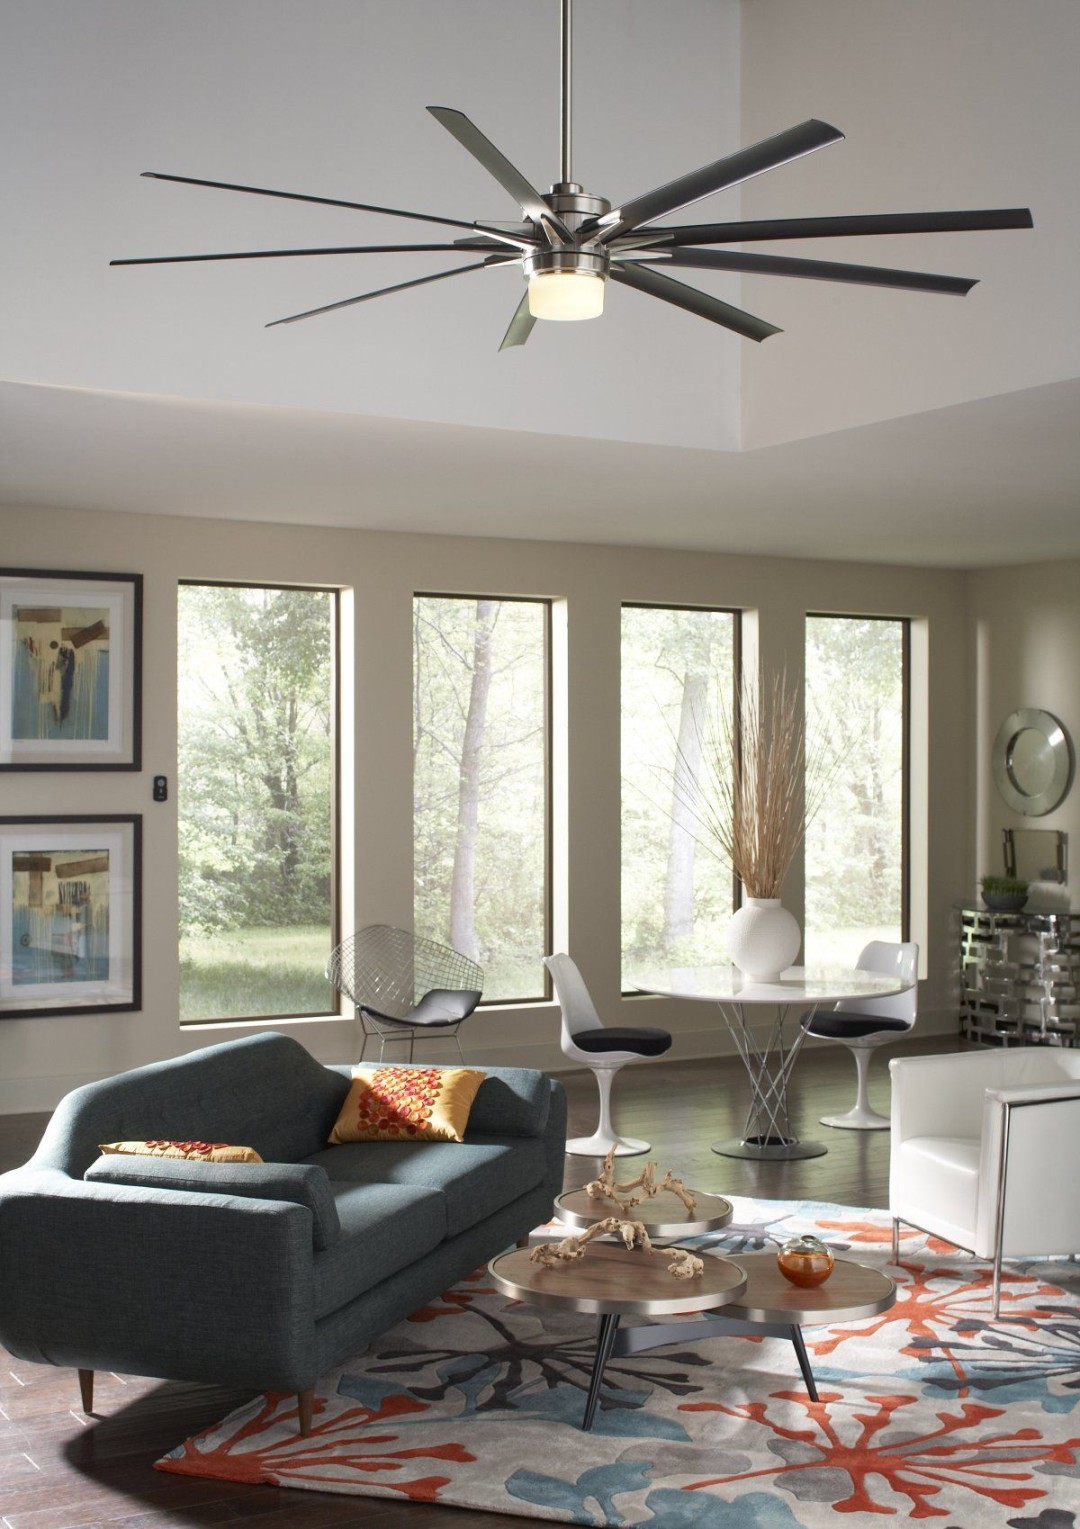 Decorating with Ceiling Fans: Interior Design Ideas that Work